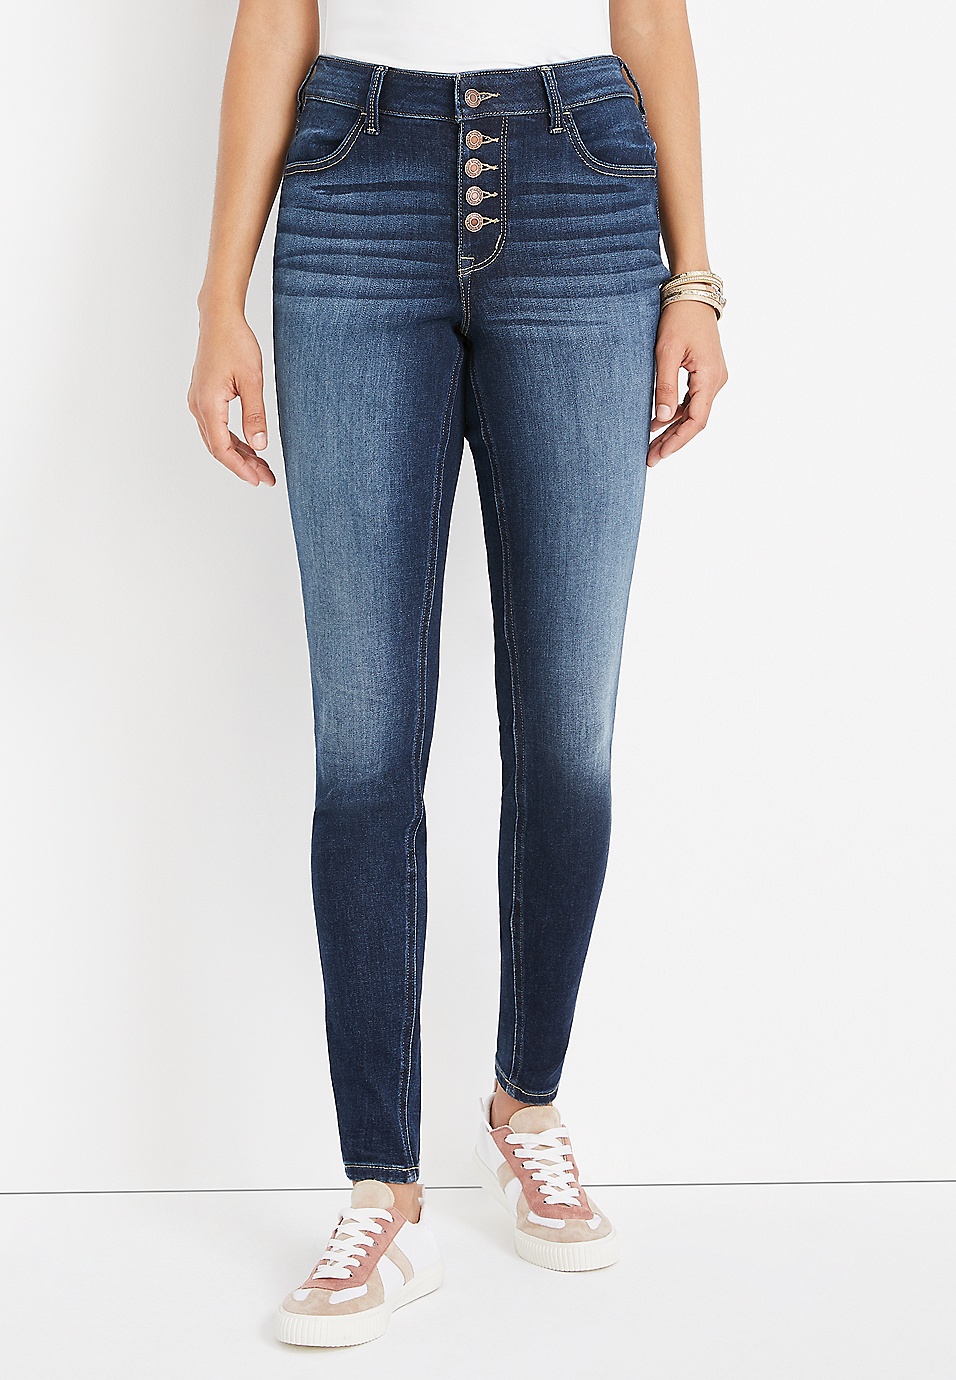 m jeans by maurices™ Cool Comfort High Rise Button Fly Jegging | maurices